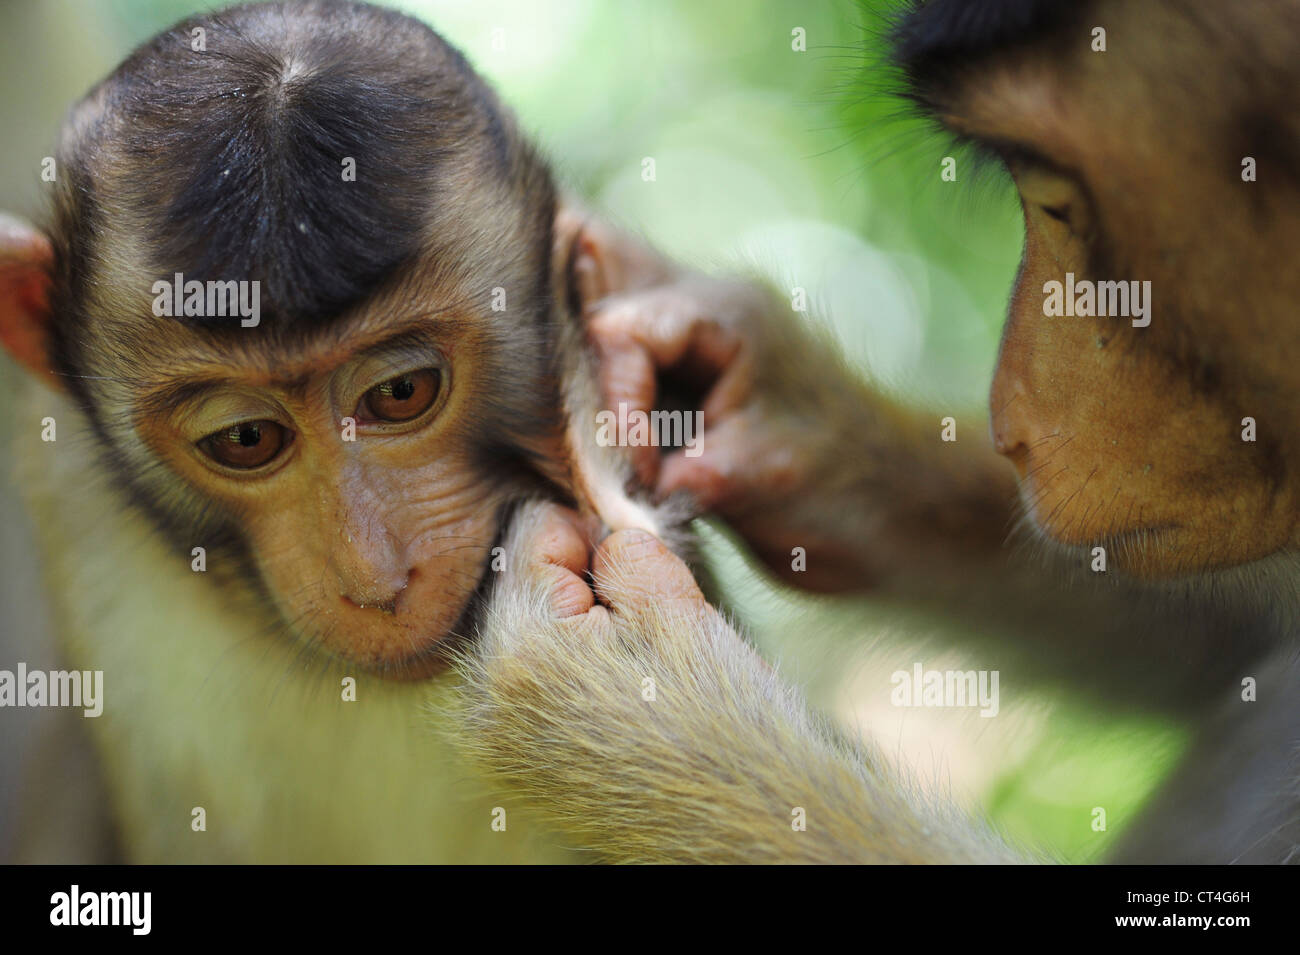 Malaysia, Borneo, Sepilok, Southern Pig-tailed Macaque (Macaca nemestrina) adult female with baby, in primary rainforest lousing Stock Photo